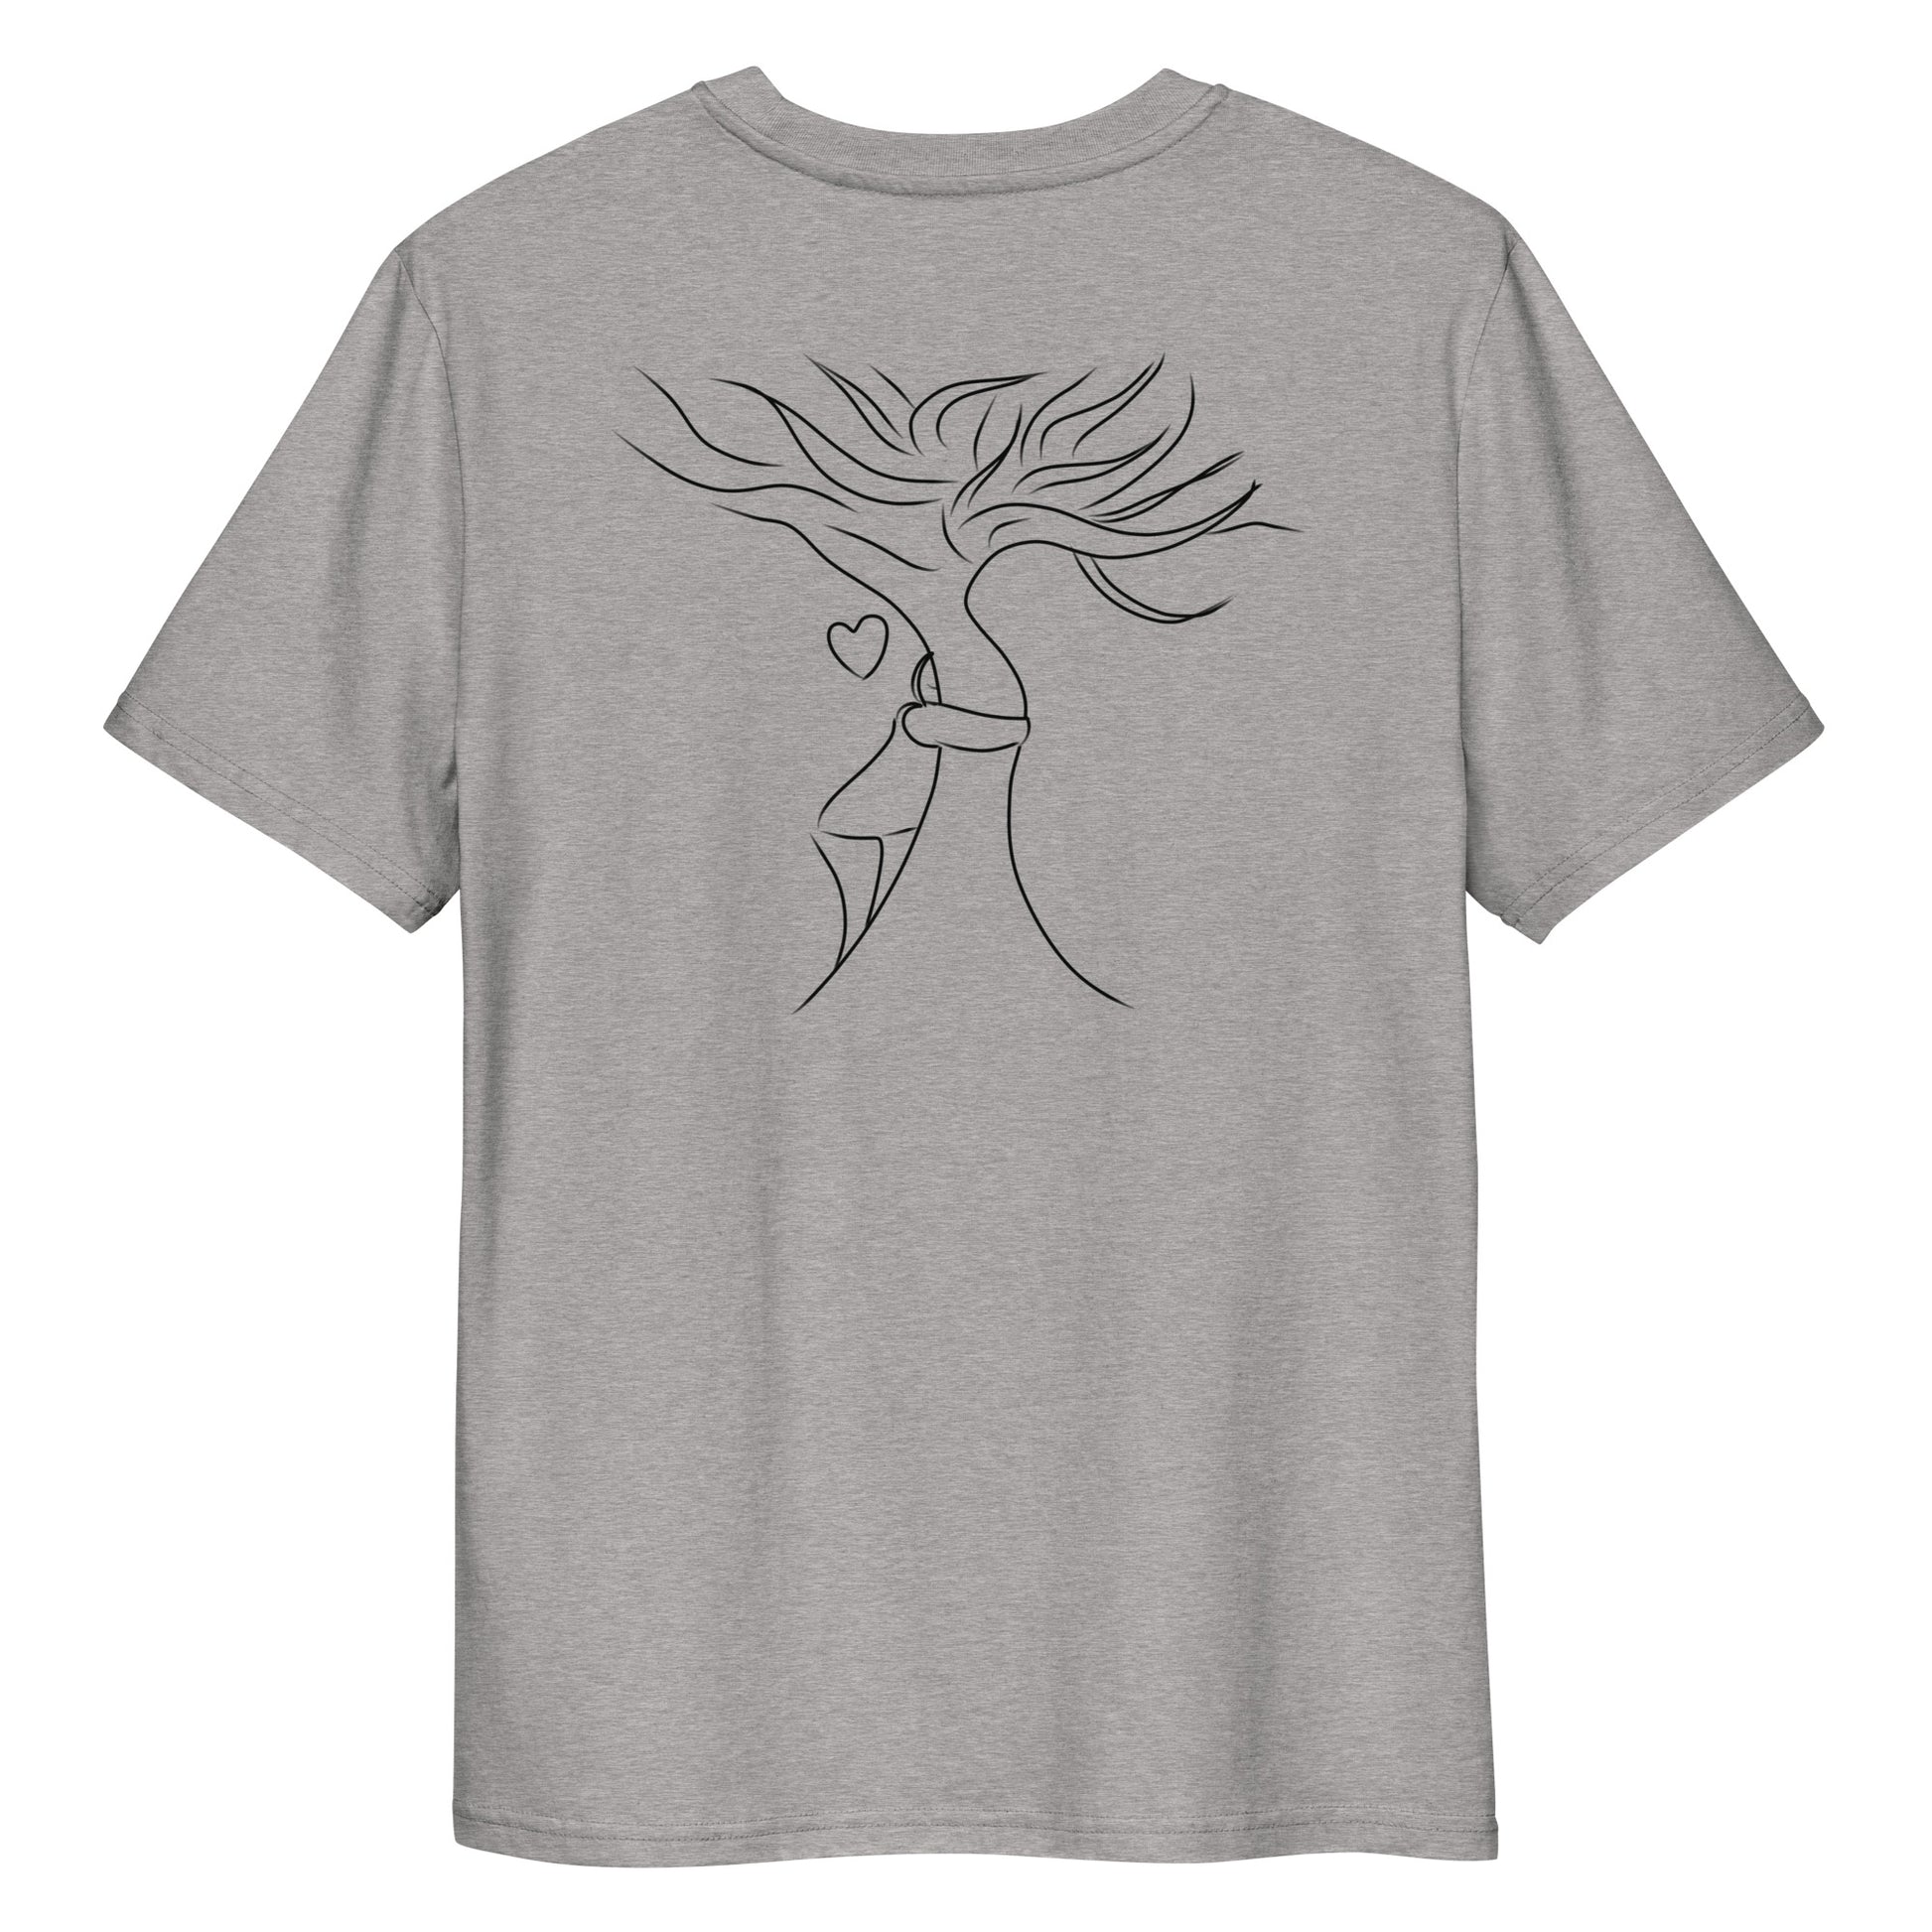 Sustainable Embrace Tree | 100% Organic Cotton T Shirt in heather grey back view